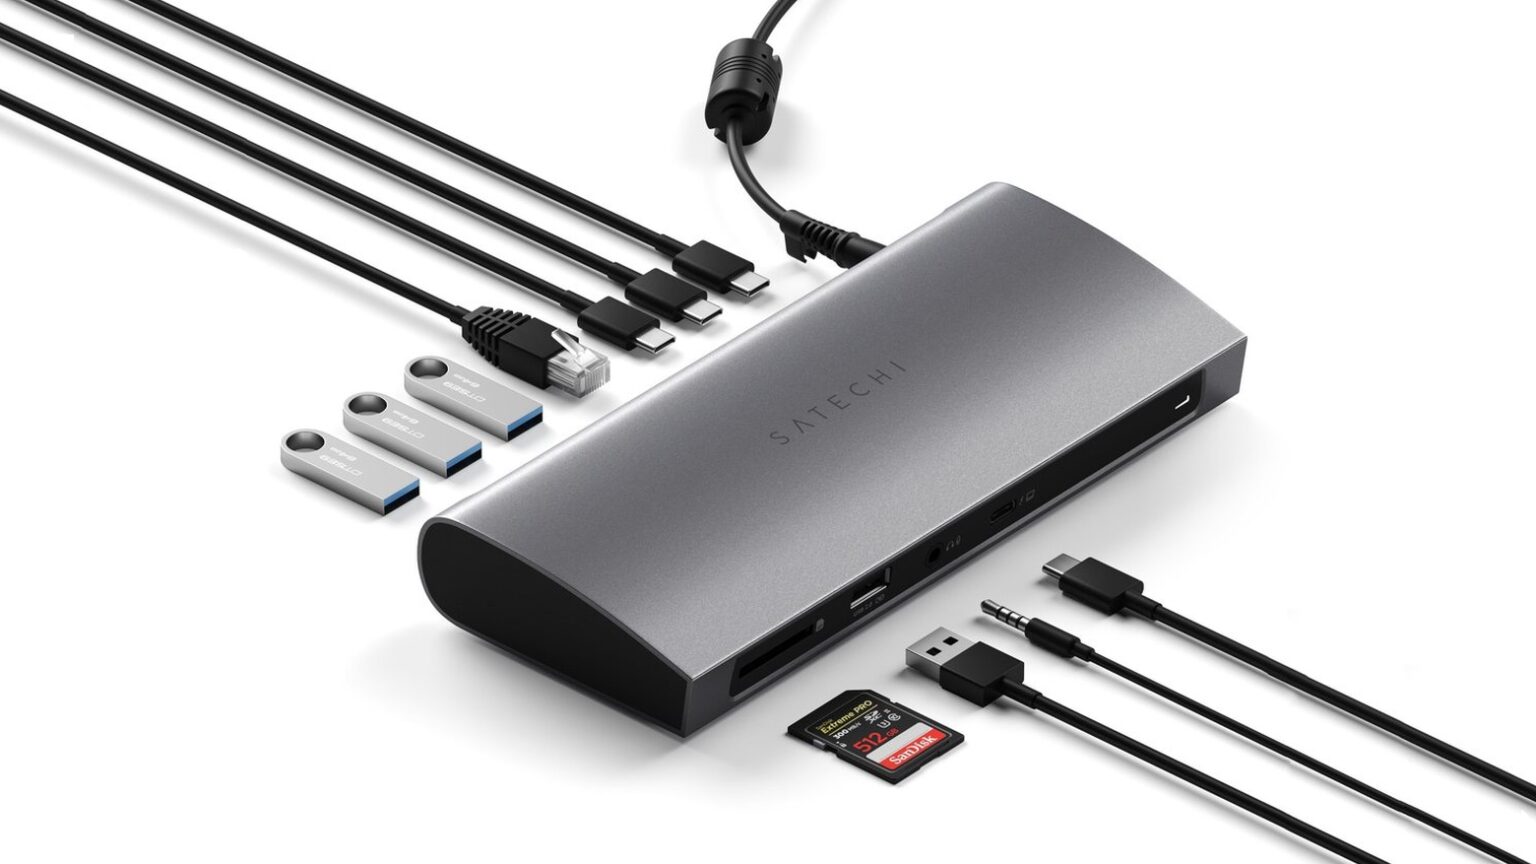 New Satechi Mac dock adds multiple Thunderbolt and USB-A ports, plus more